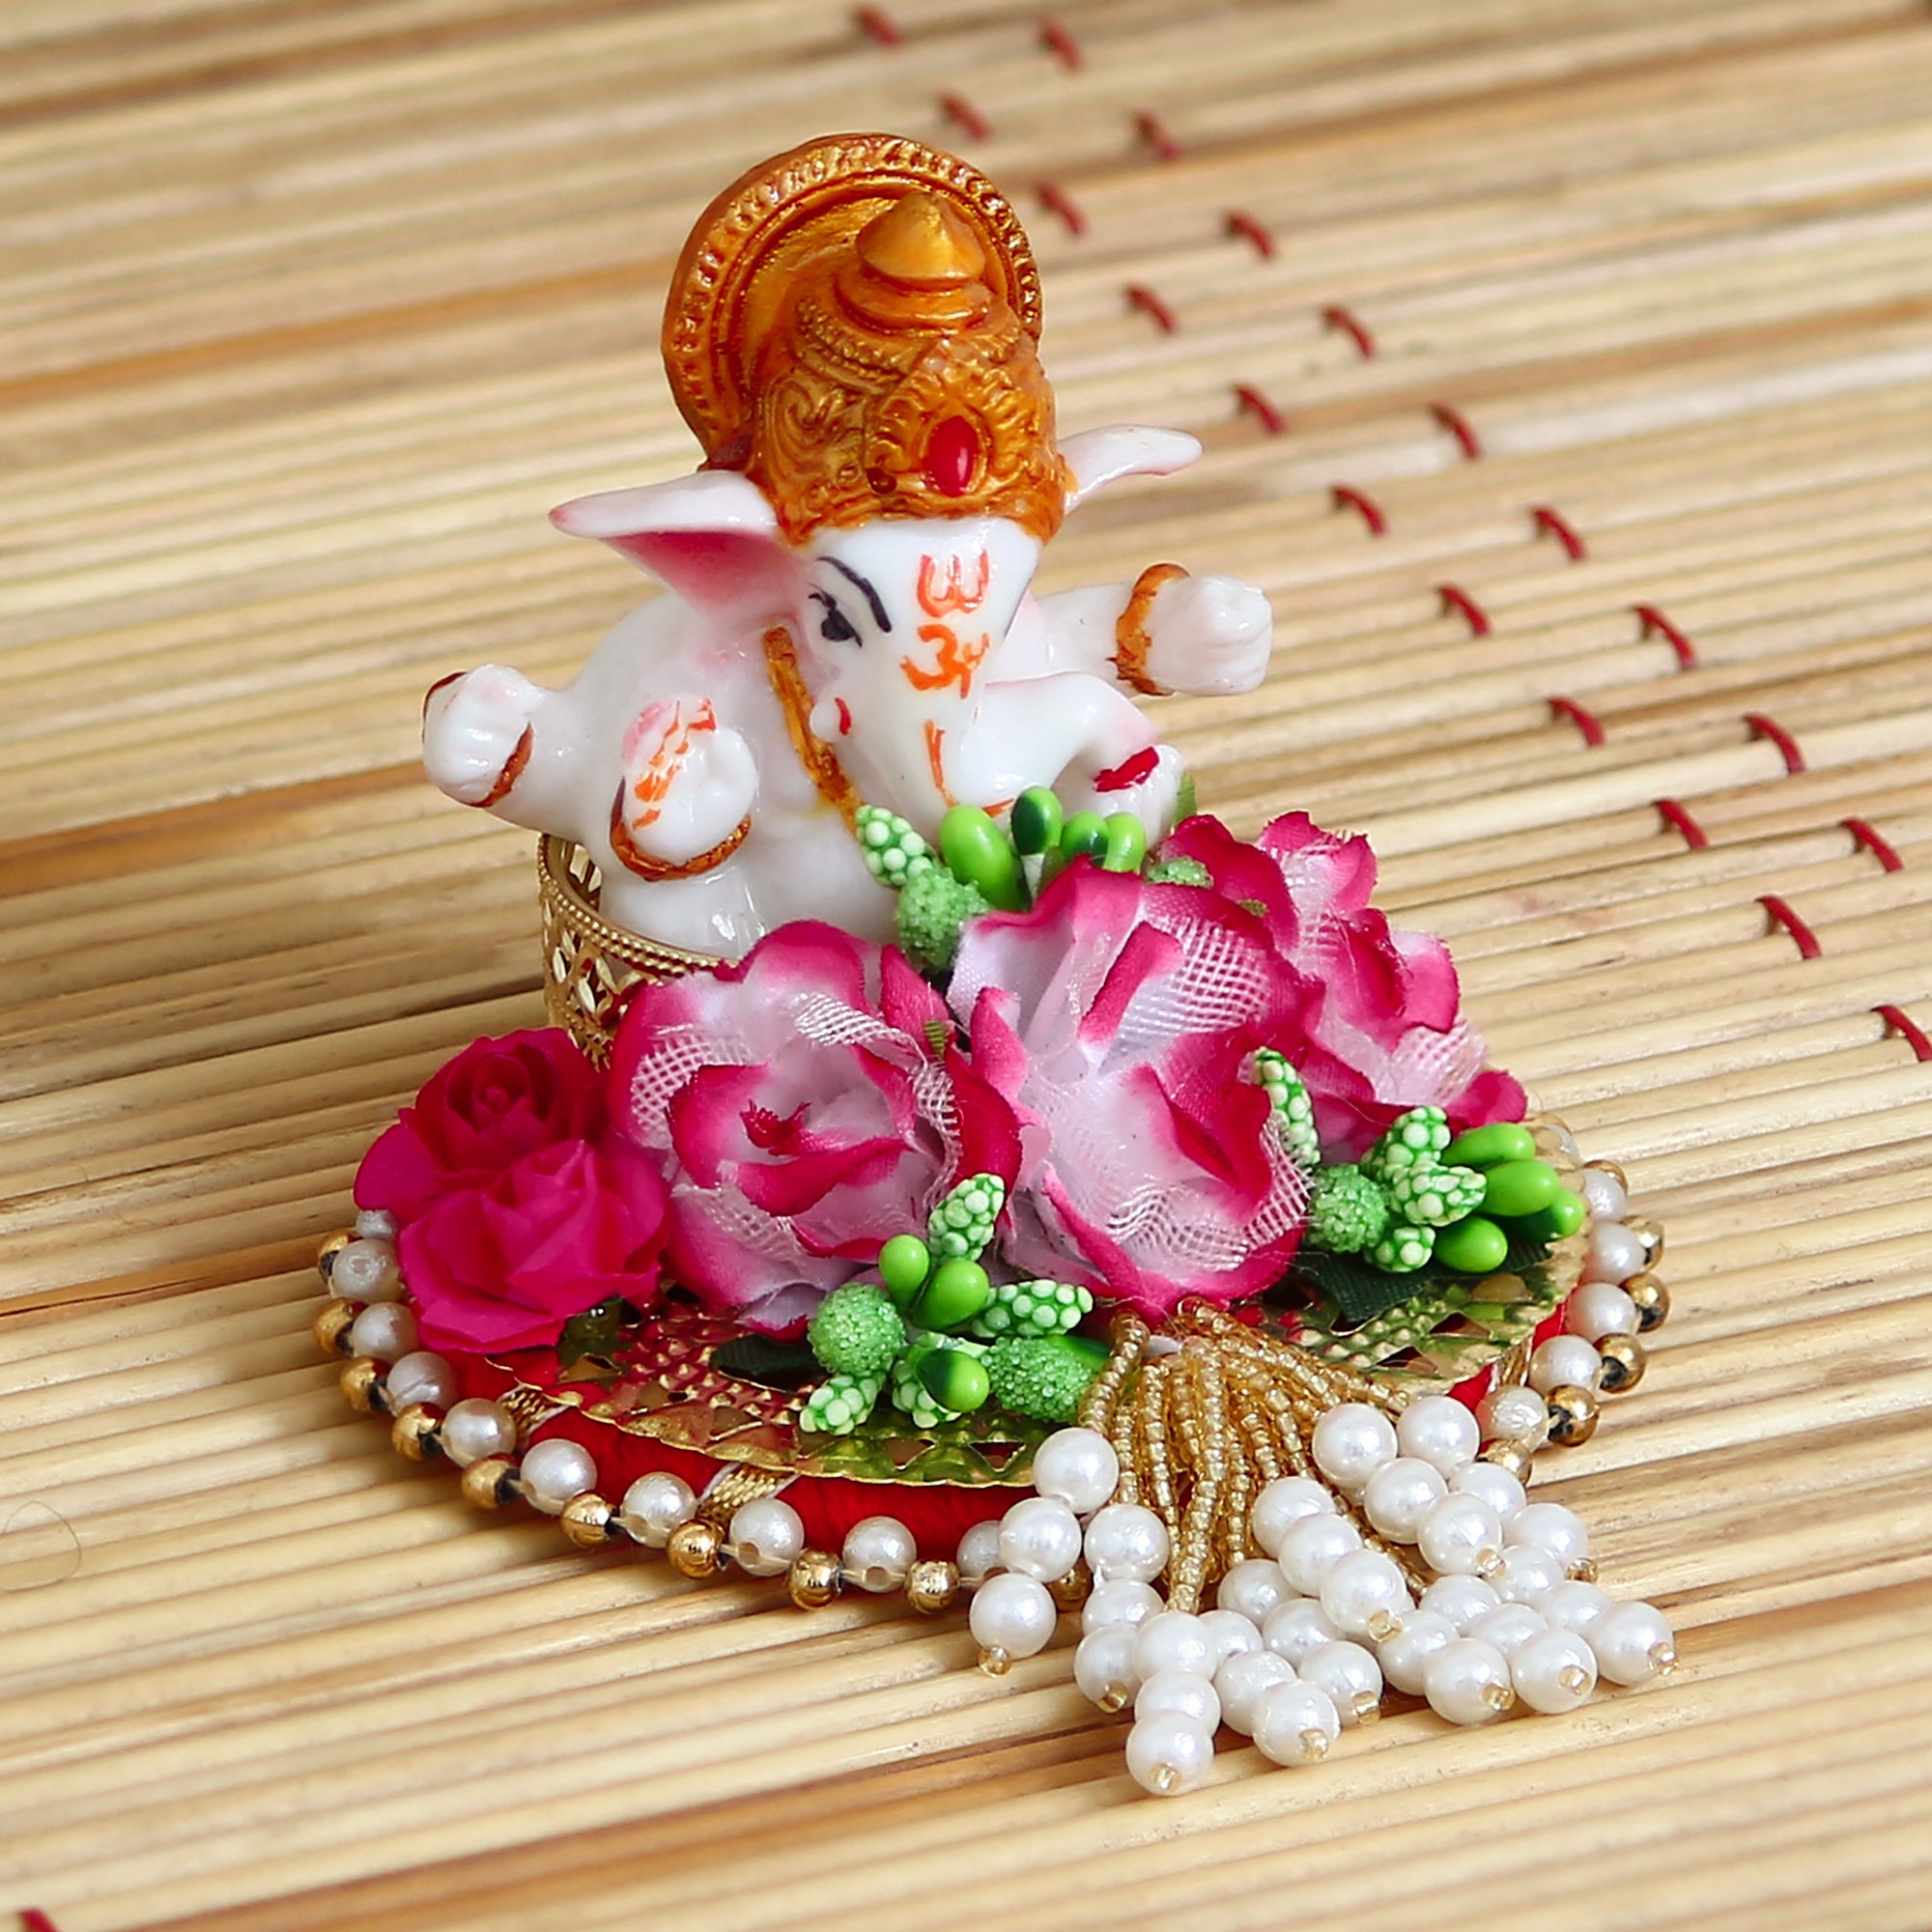 Lord Ganesha Idol On Decorative Handcrafted Colorful Flowers Plate 1